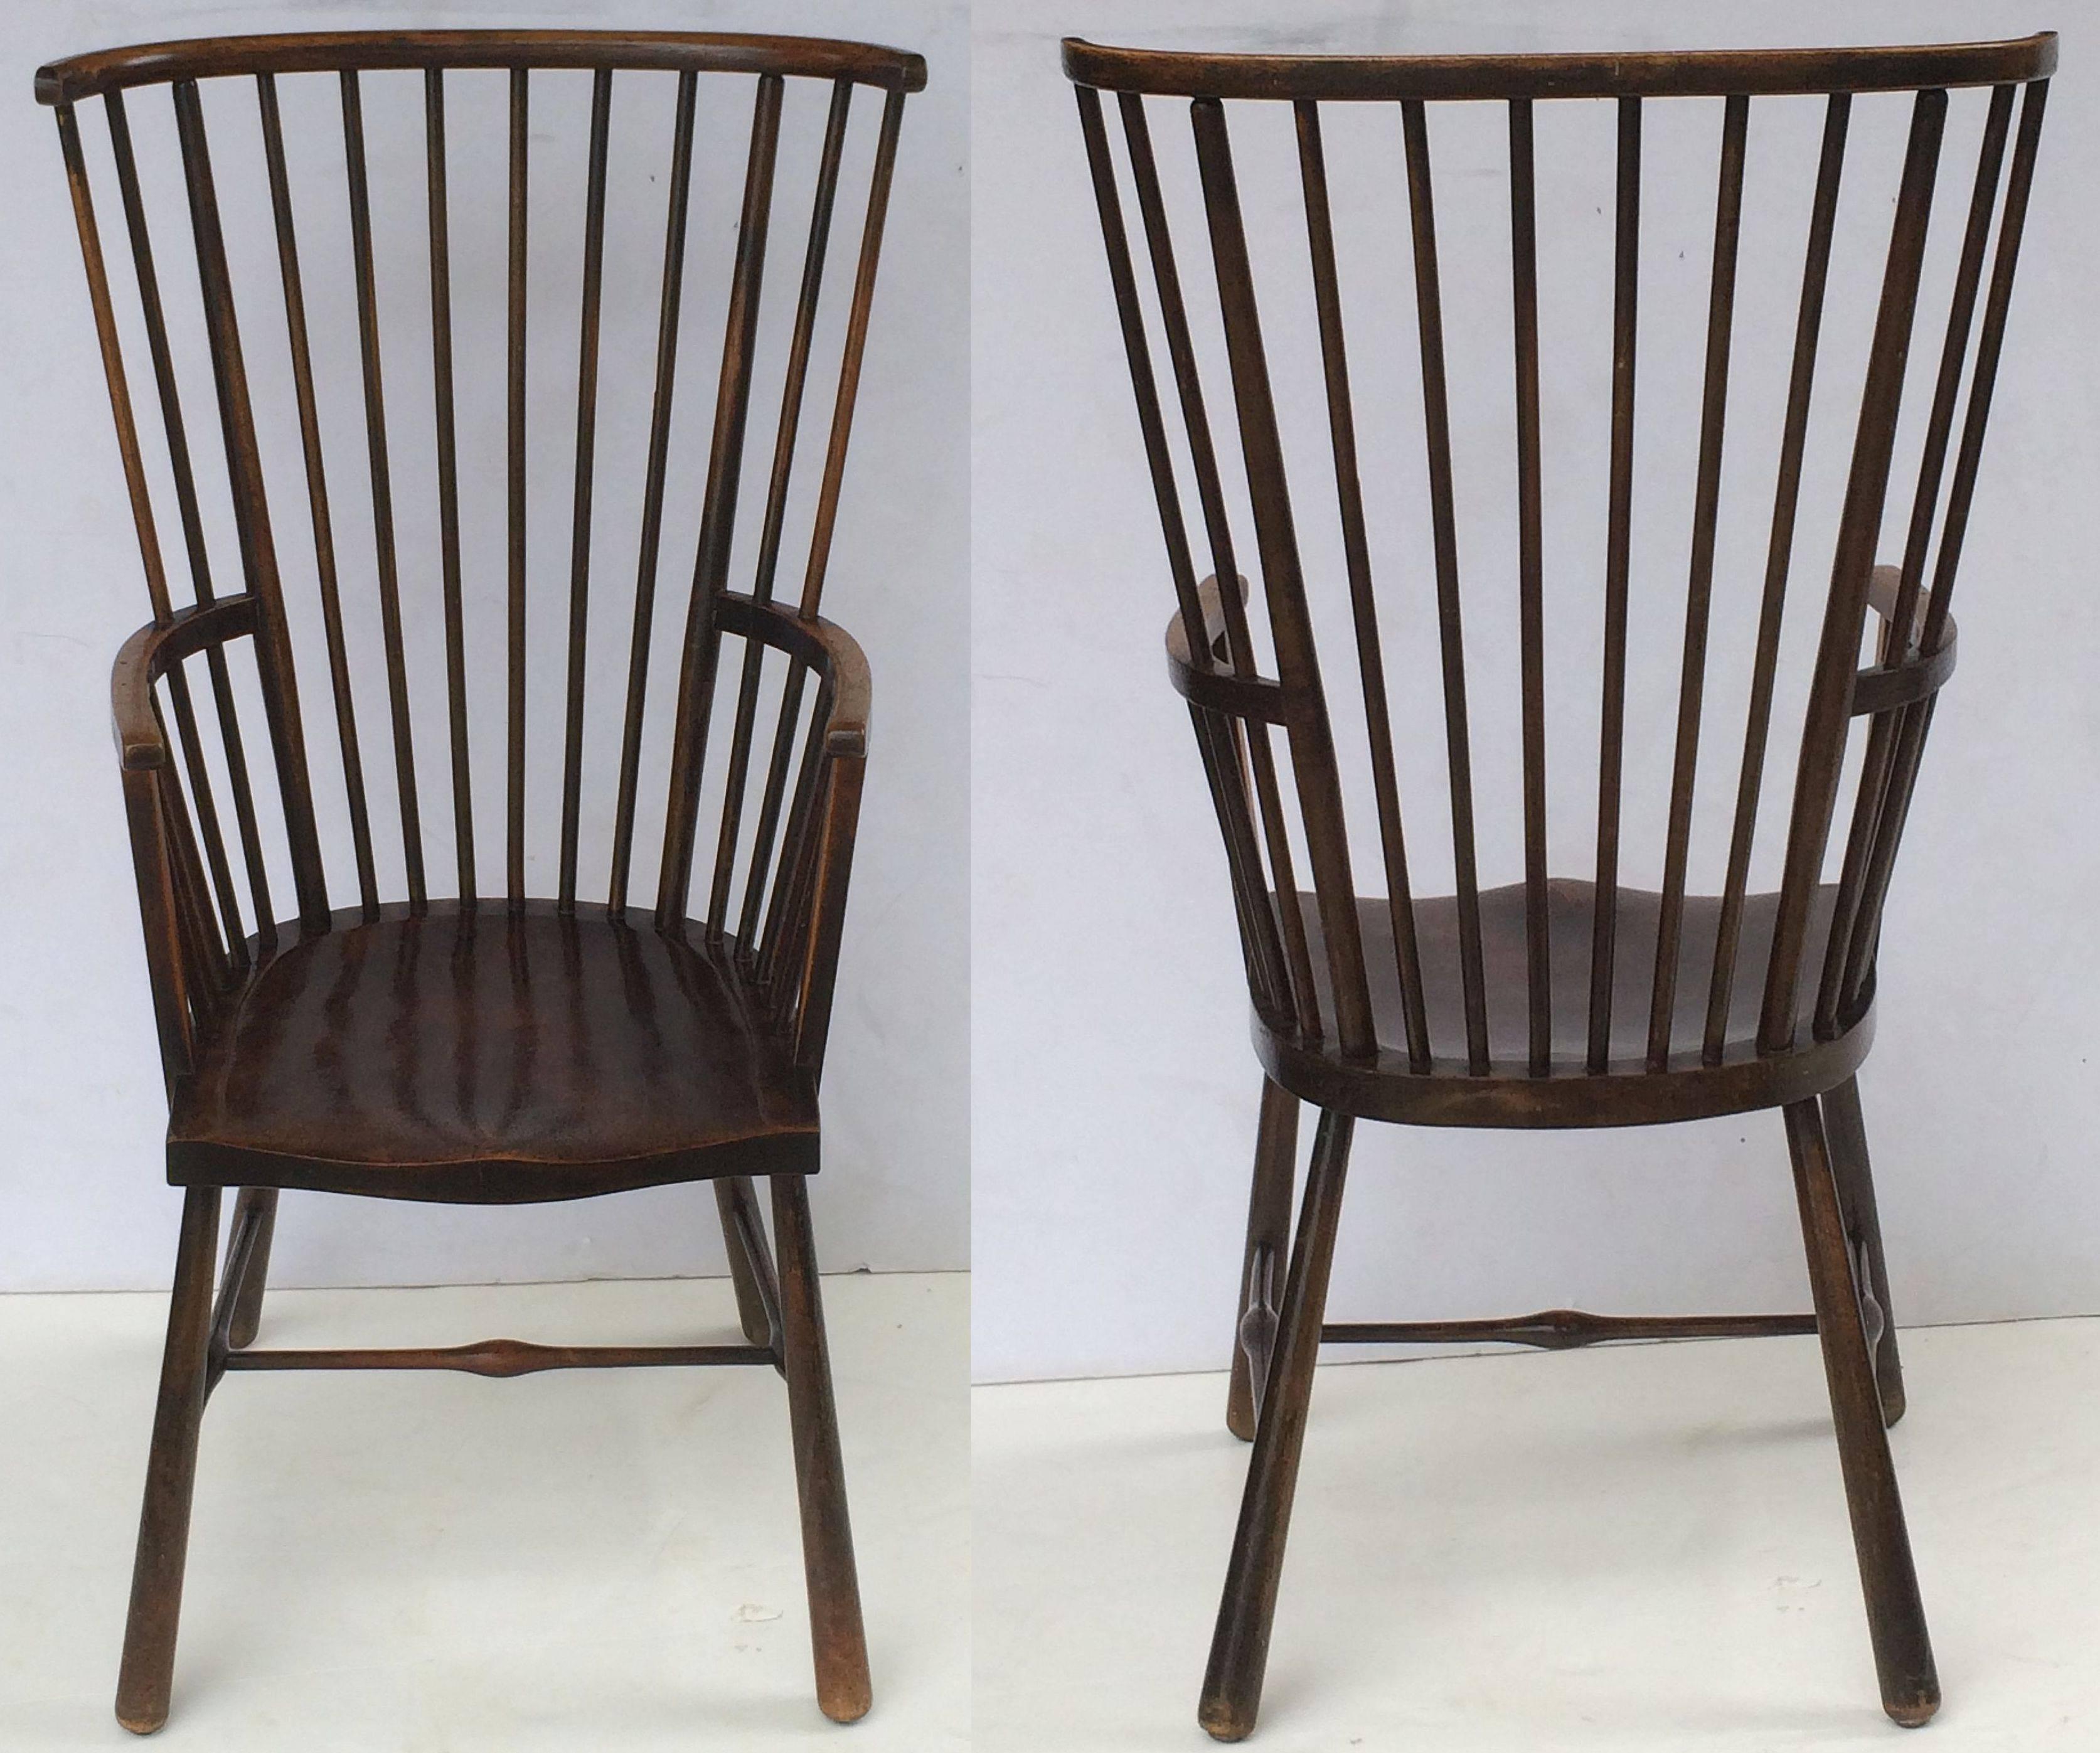 English Arts and Crafts Windsor Chair by Liberty & Co. 